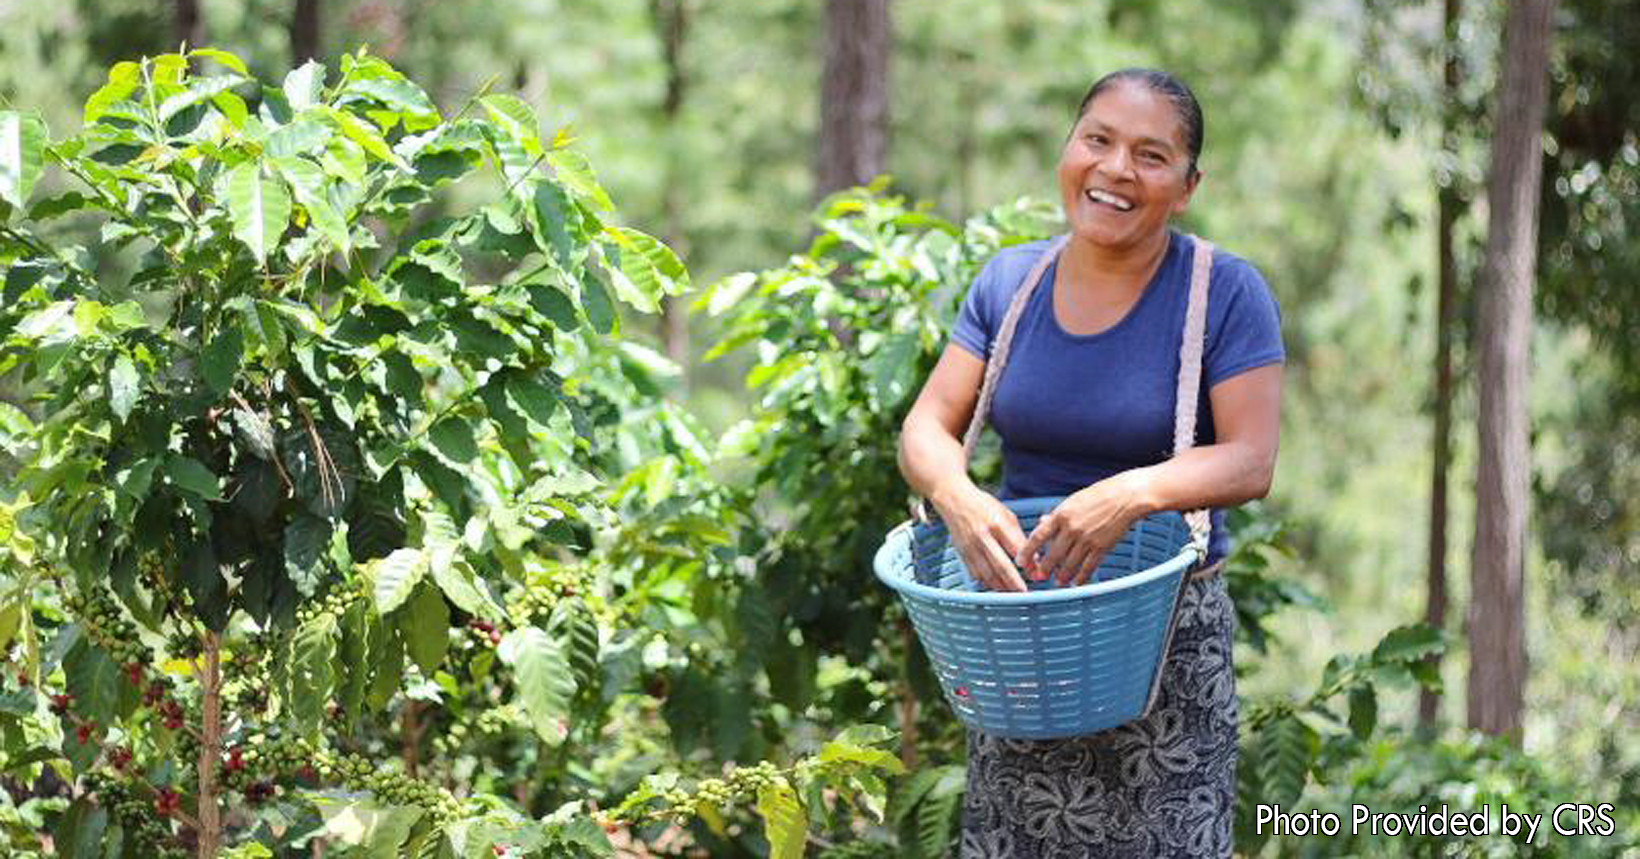 The CRS is teaching those around the world how to manage their own farmland. The young woman Carmelina, is one of the many people the CRS is helping. Carmelina is using her new water-smart agriculture skills to take care of her soil and increase her produce.